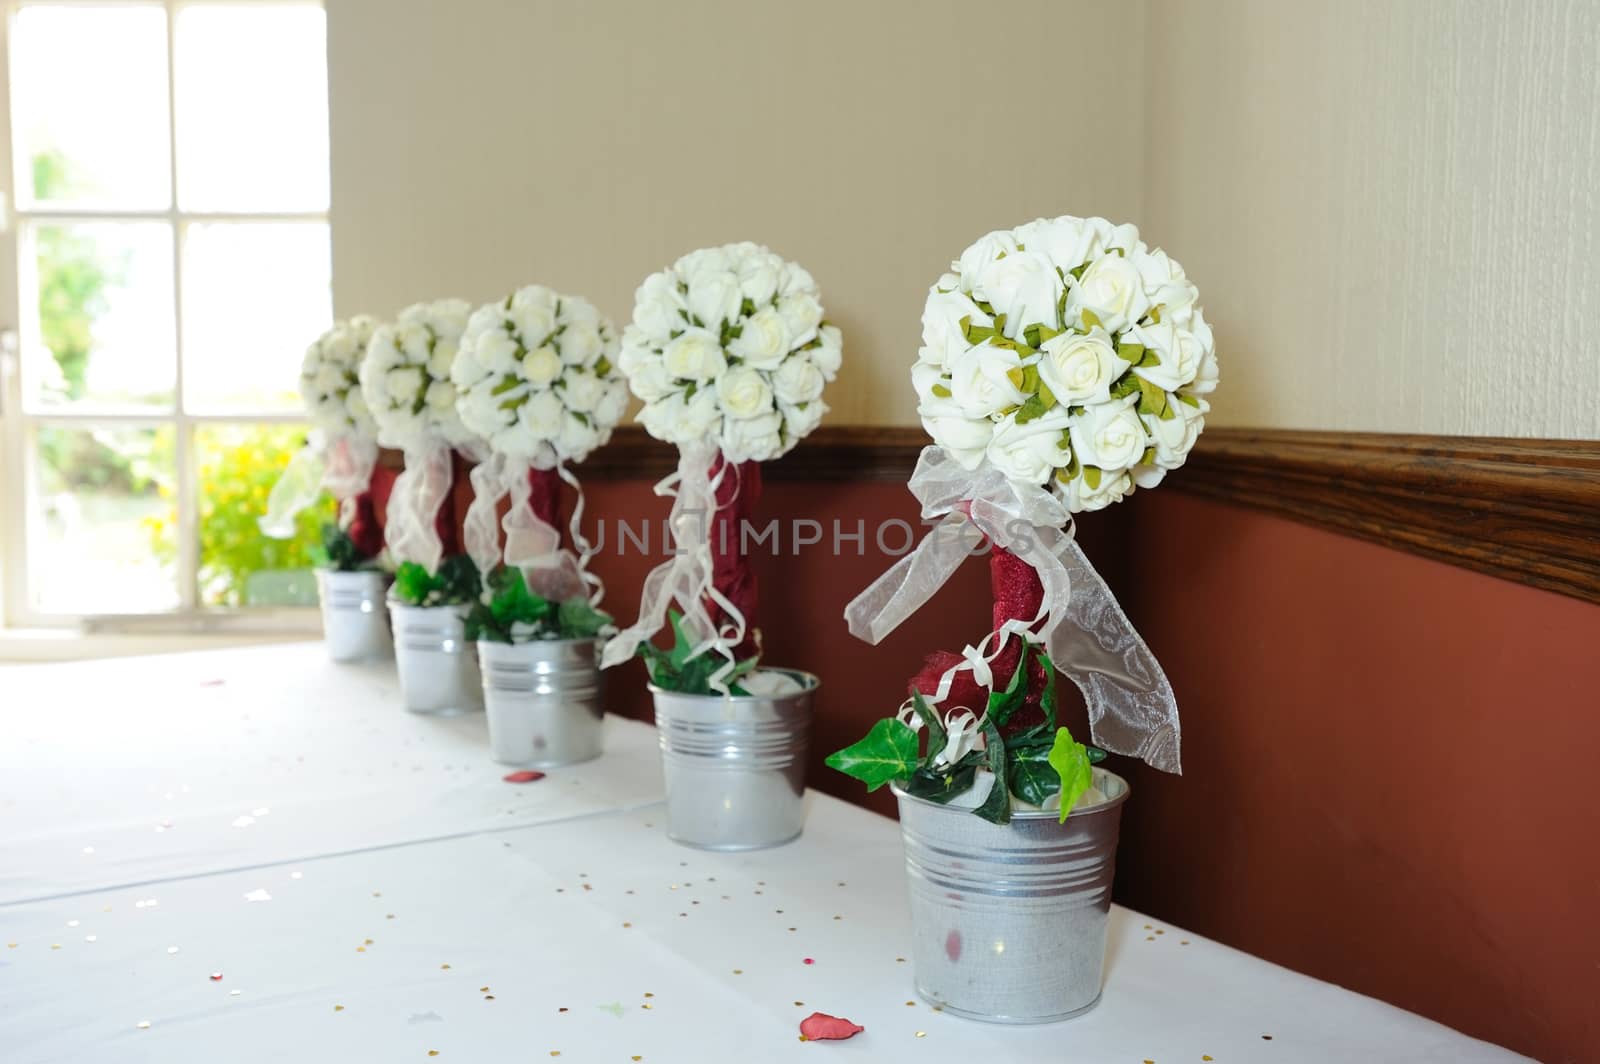 Roses decorate table at wedding by kmwphotography